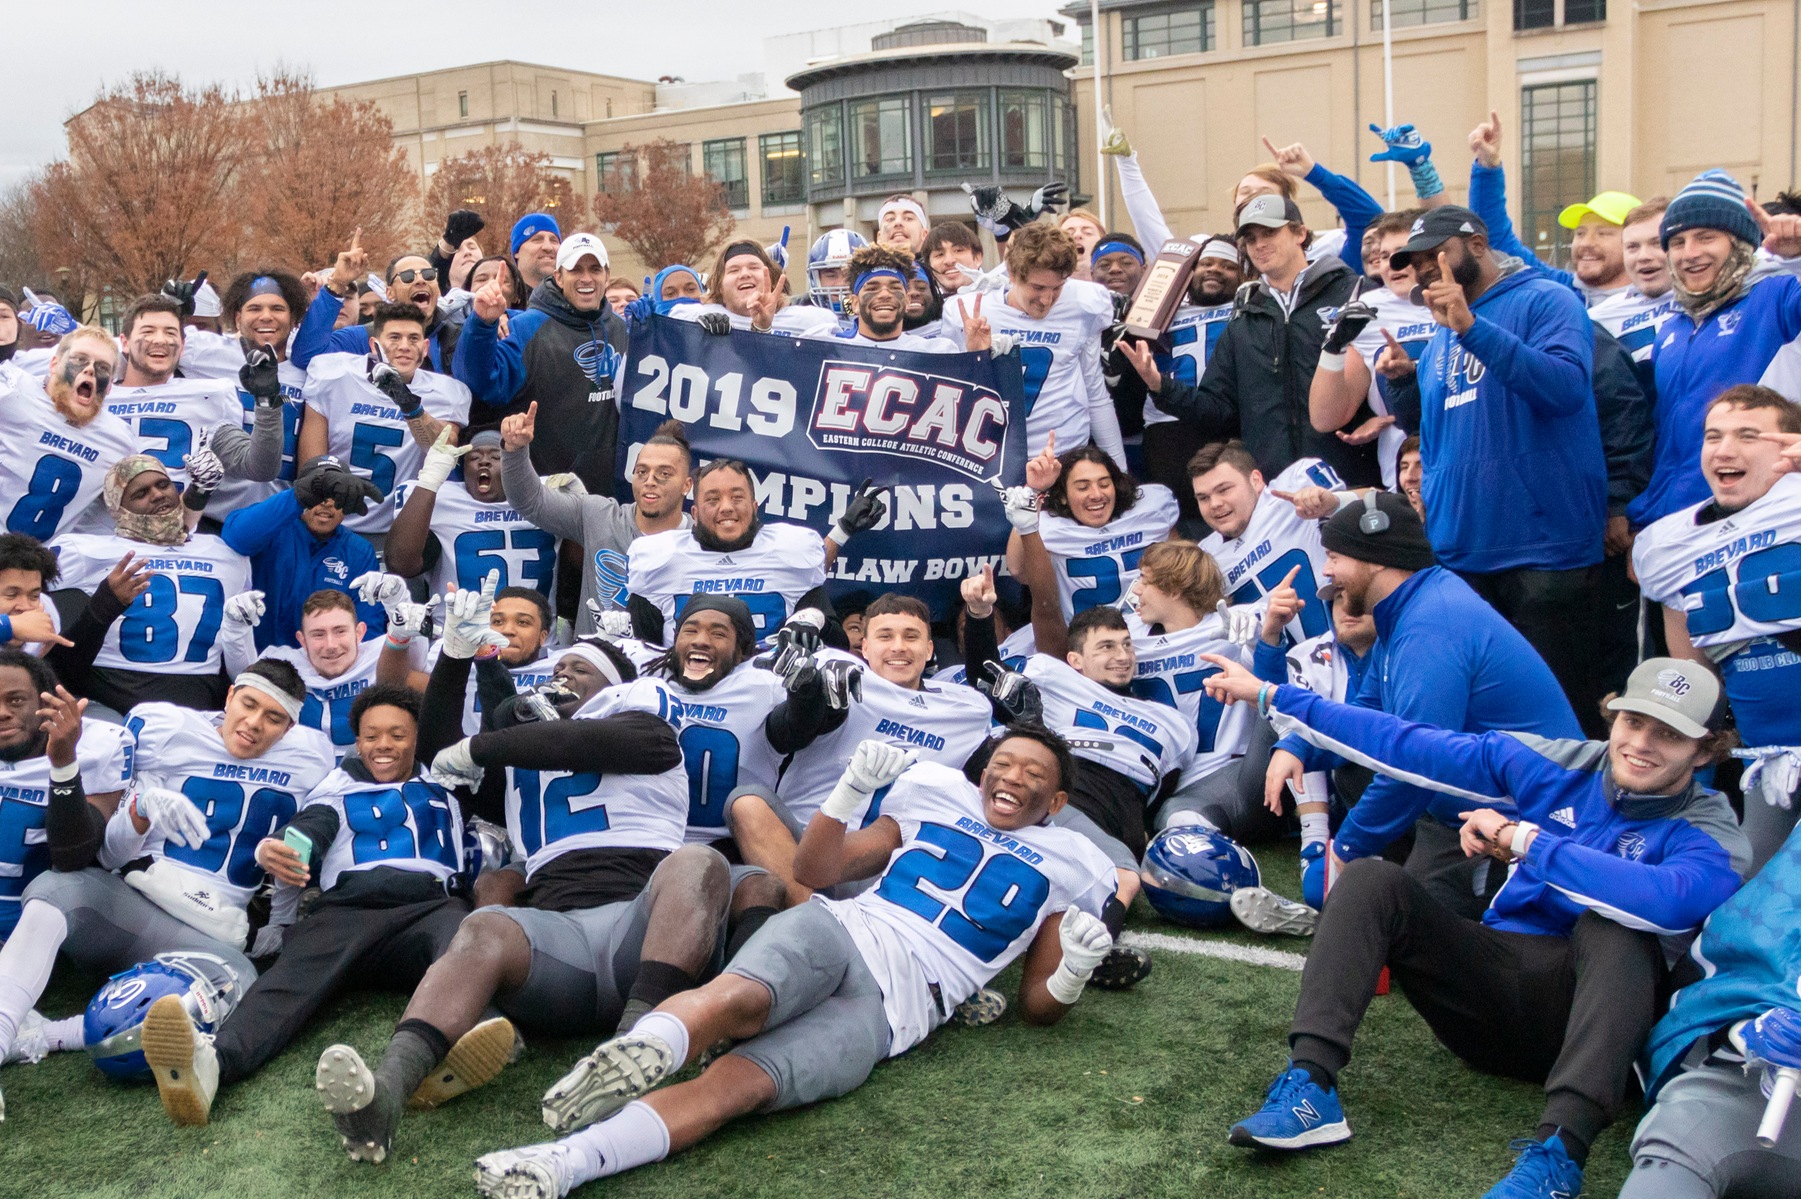 The 2019 Brevard College Football team celebrating its ECAC Scotty Whitelaw Bowl victory in Pittsburgh over Carnegie Mellon University (Photo courtesy of Carnegie Mellon Athletics).